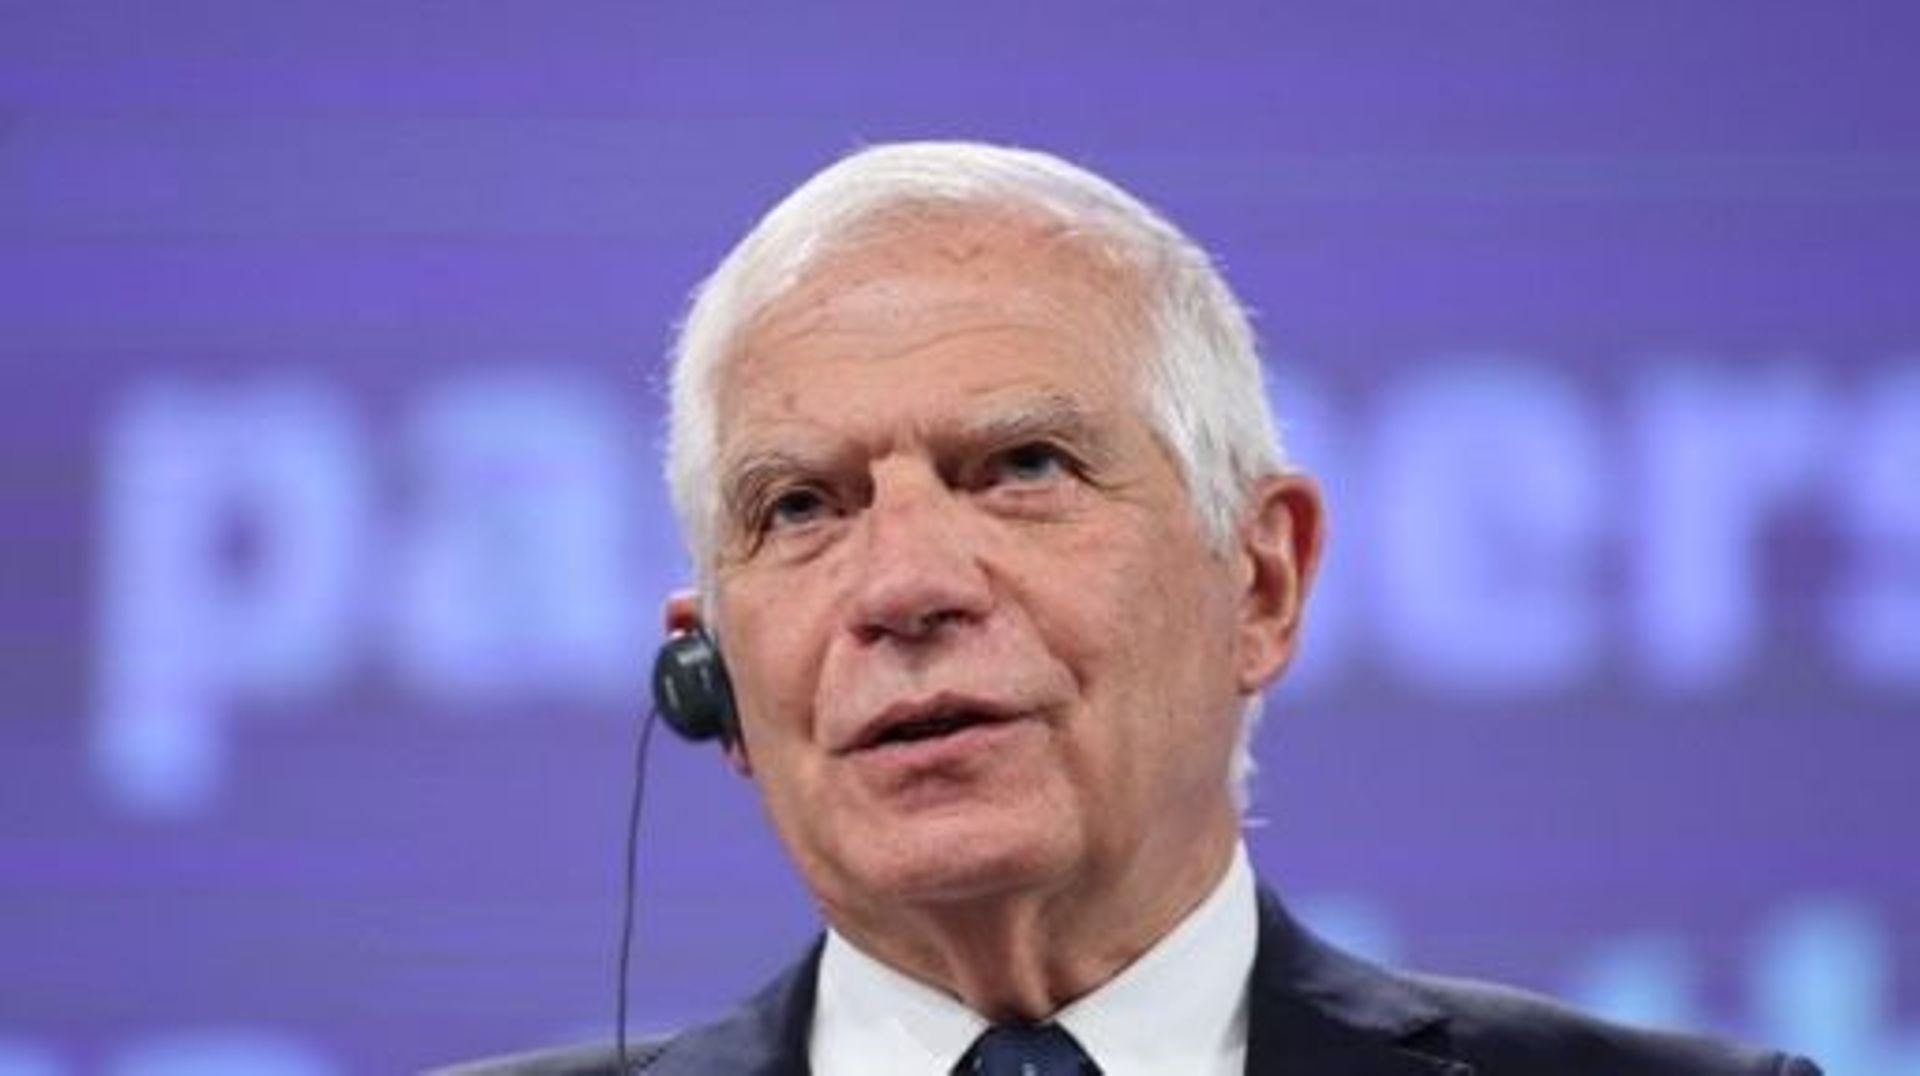 High Representative of the European Union for Foreign Affairs and Security Policy Josep Borrell speaks during a press conference on the EU’s partnership with Latin America and the Caribbeann at the EU headquarters, in Brussels on June 7, 2023. Kenzo TRIB